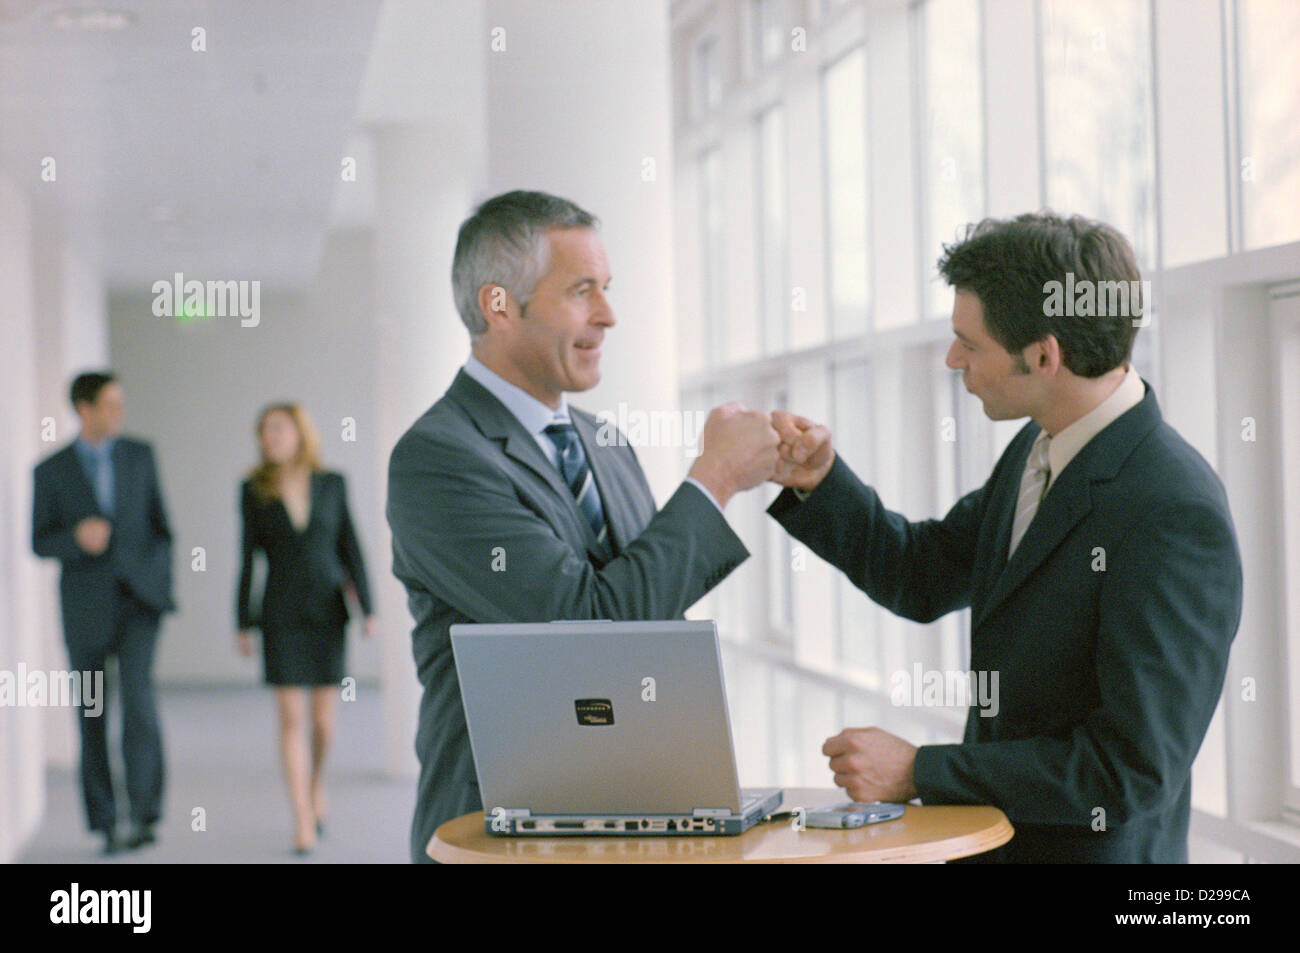 Two business people to give so a high five License free except ads and outdoor billboards Stock Photo